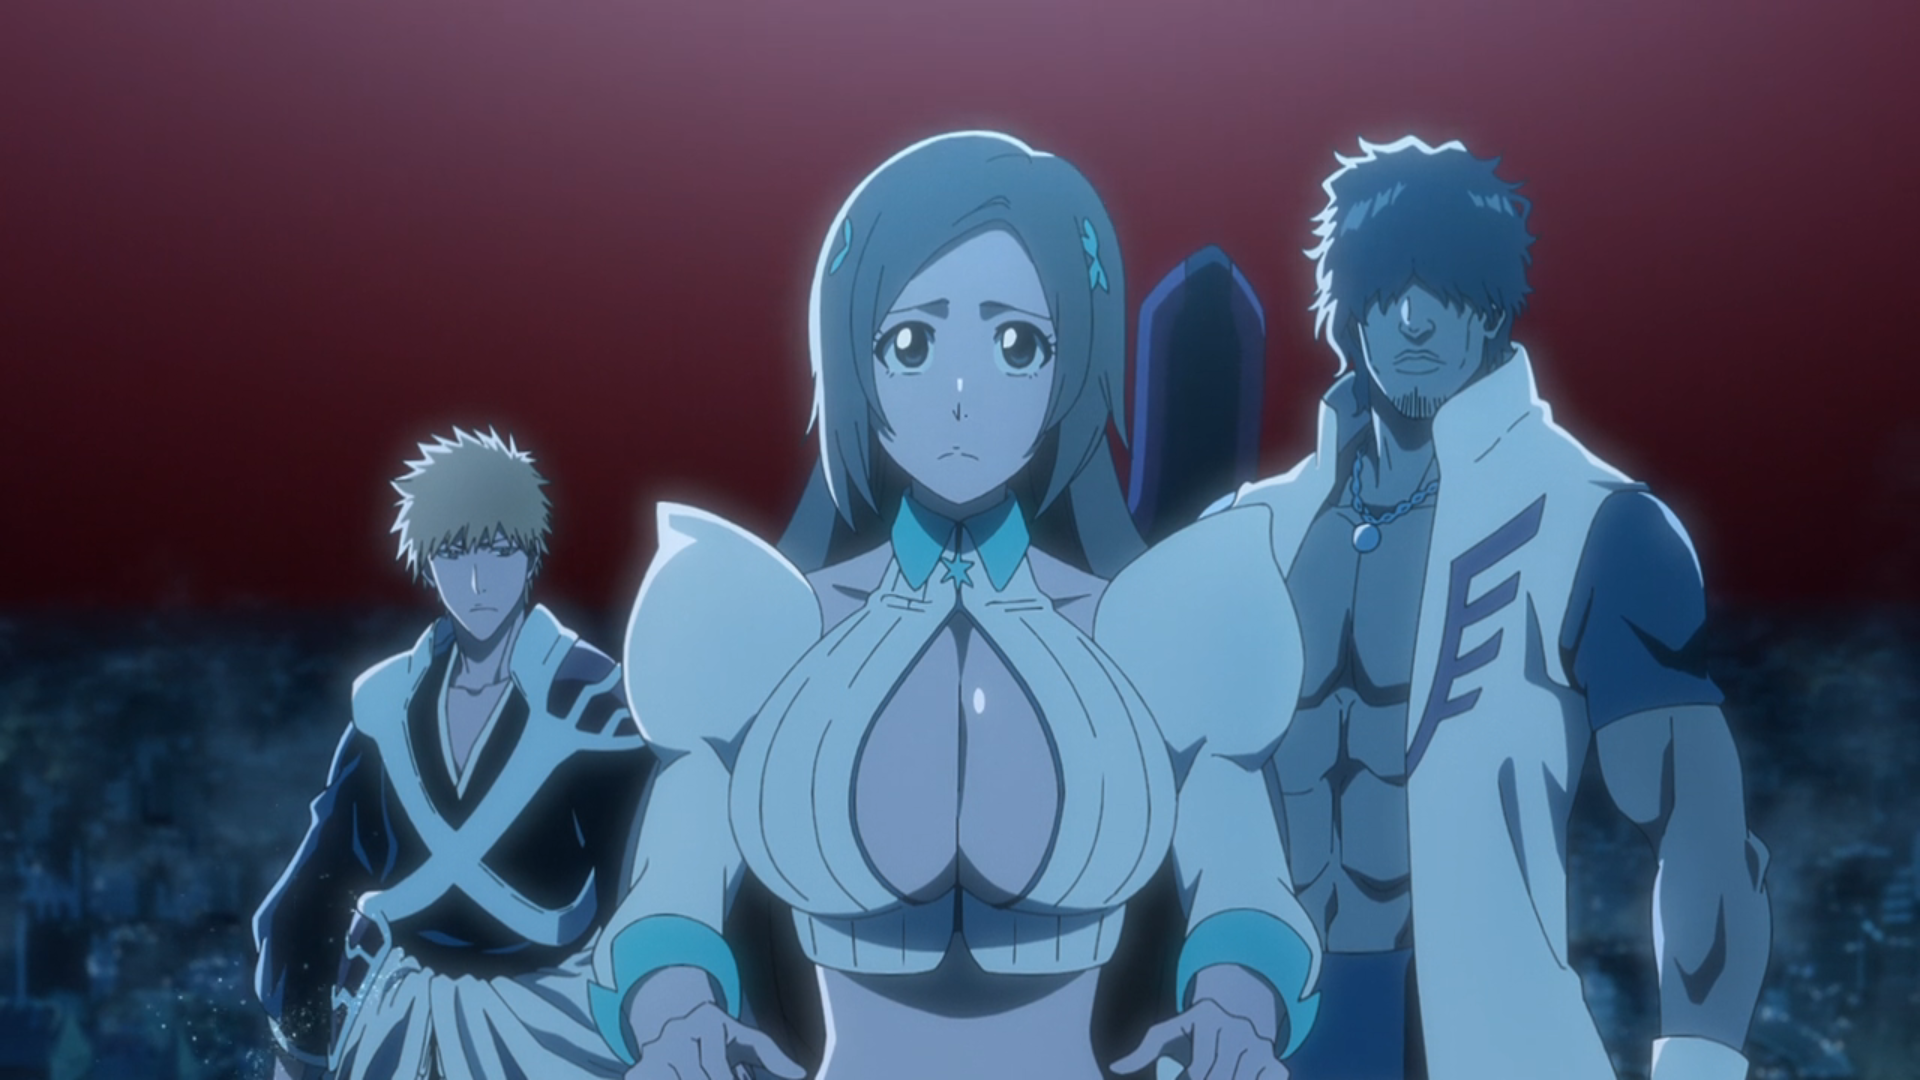 Bleach TYBW Part 2 Episode 1: Exact release time and where to